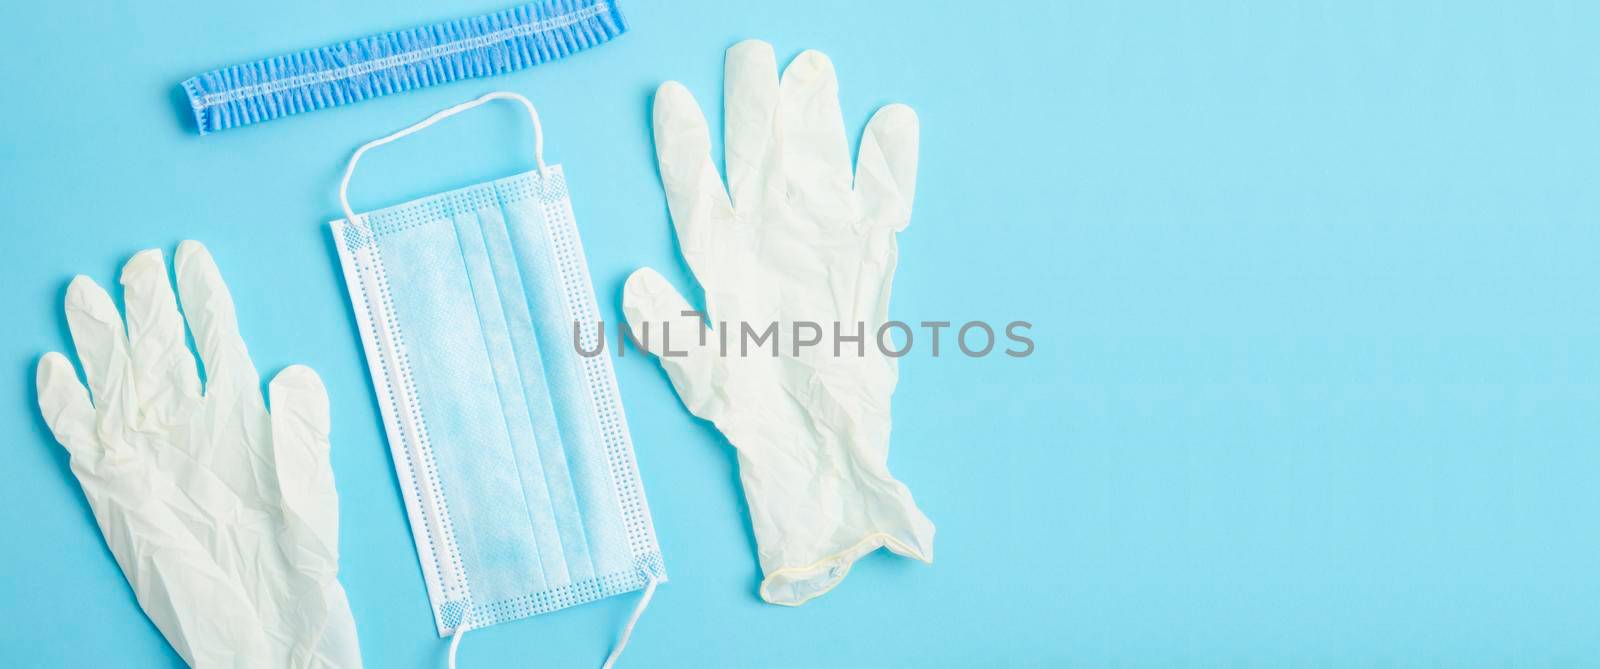 Medical gear protecting against transmittable diseases, on blue background by Gamjai